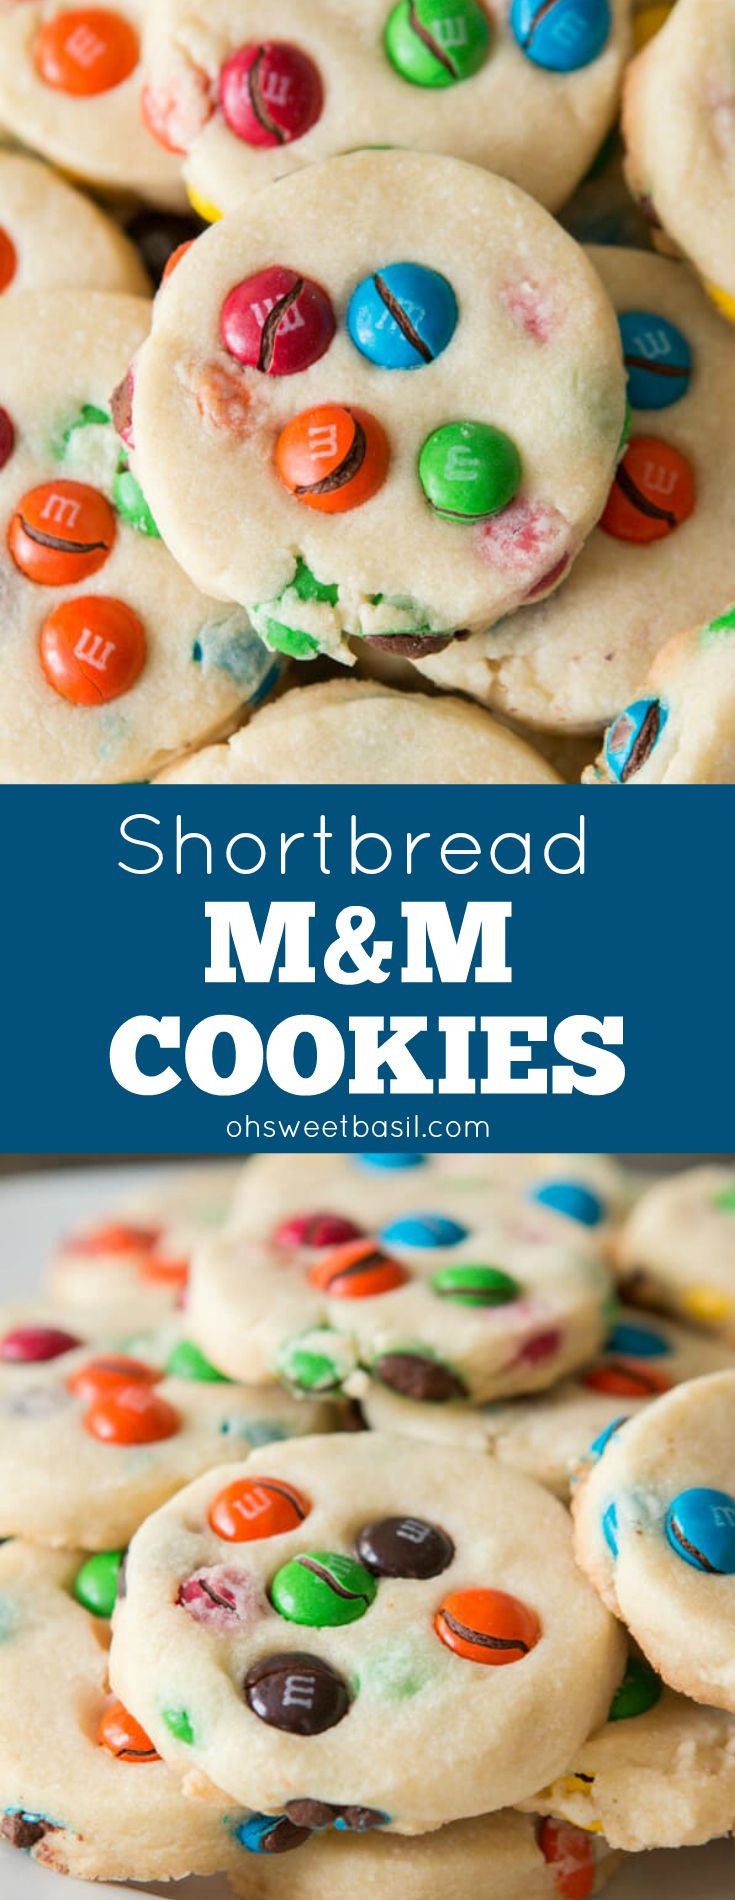 M&amp;M Christmas Cookies
 The Best Ideas for M&m Christmas Cookies Best Diet and